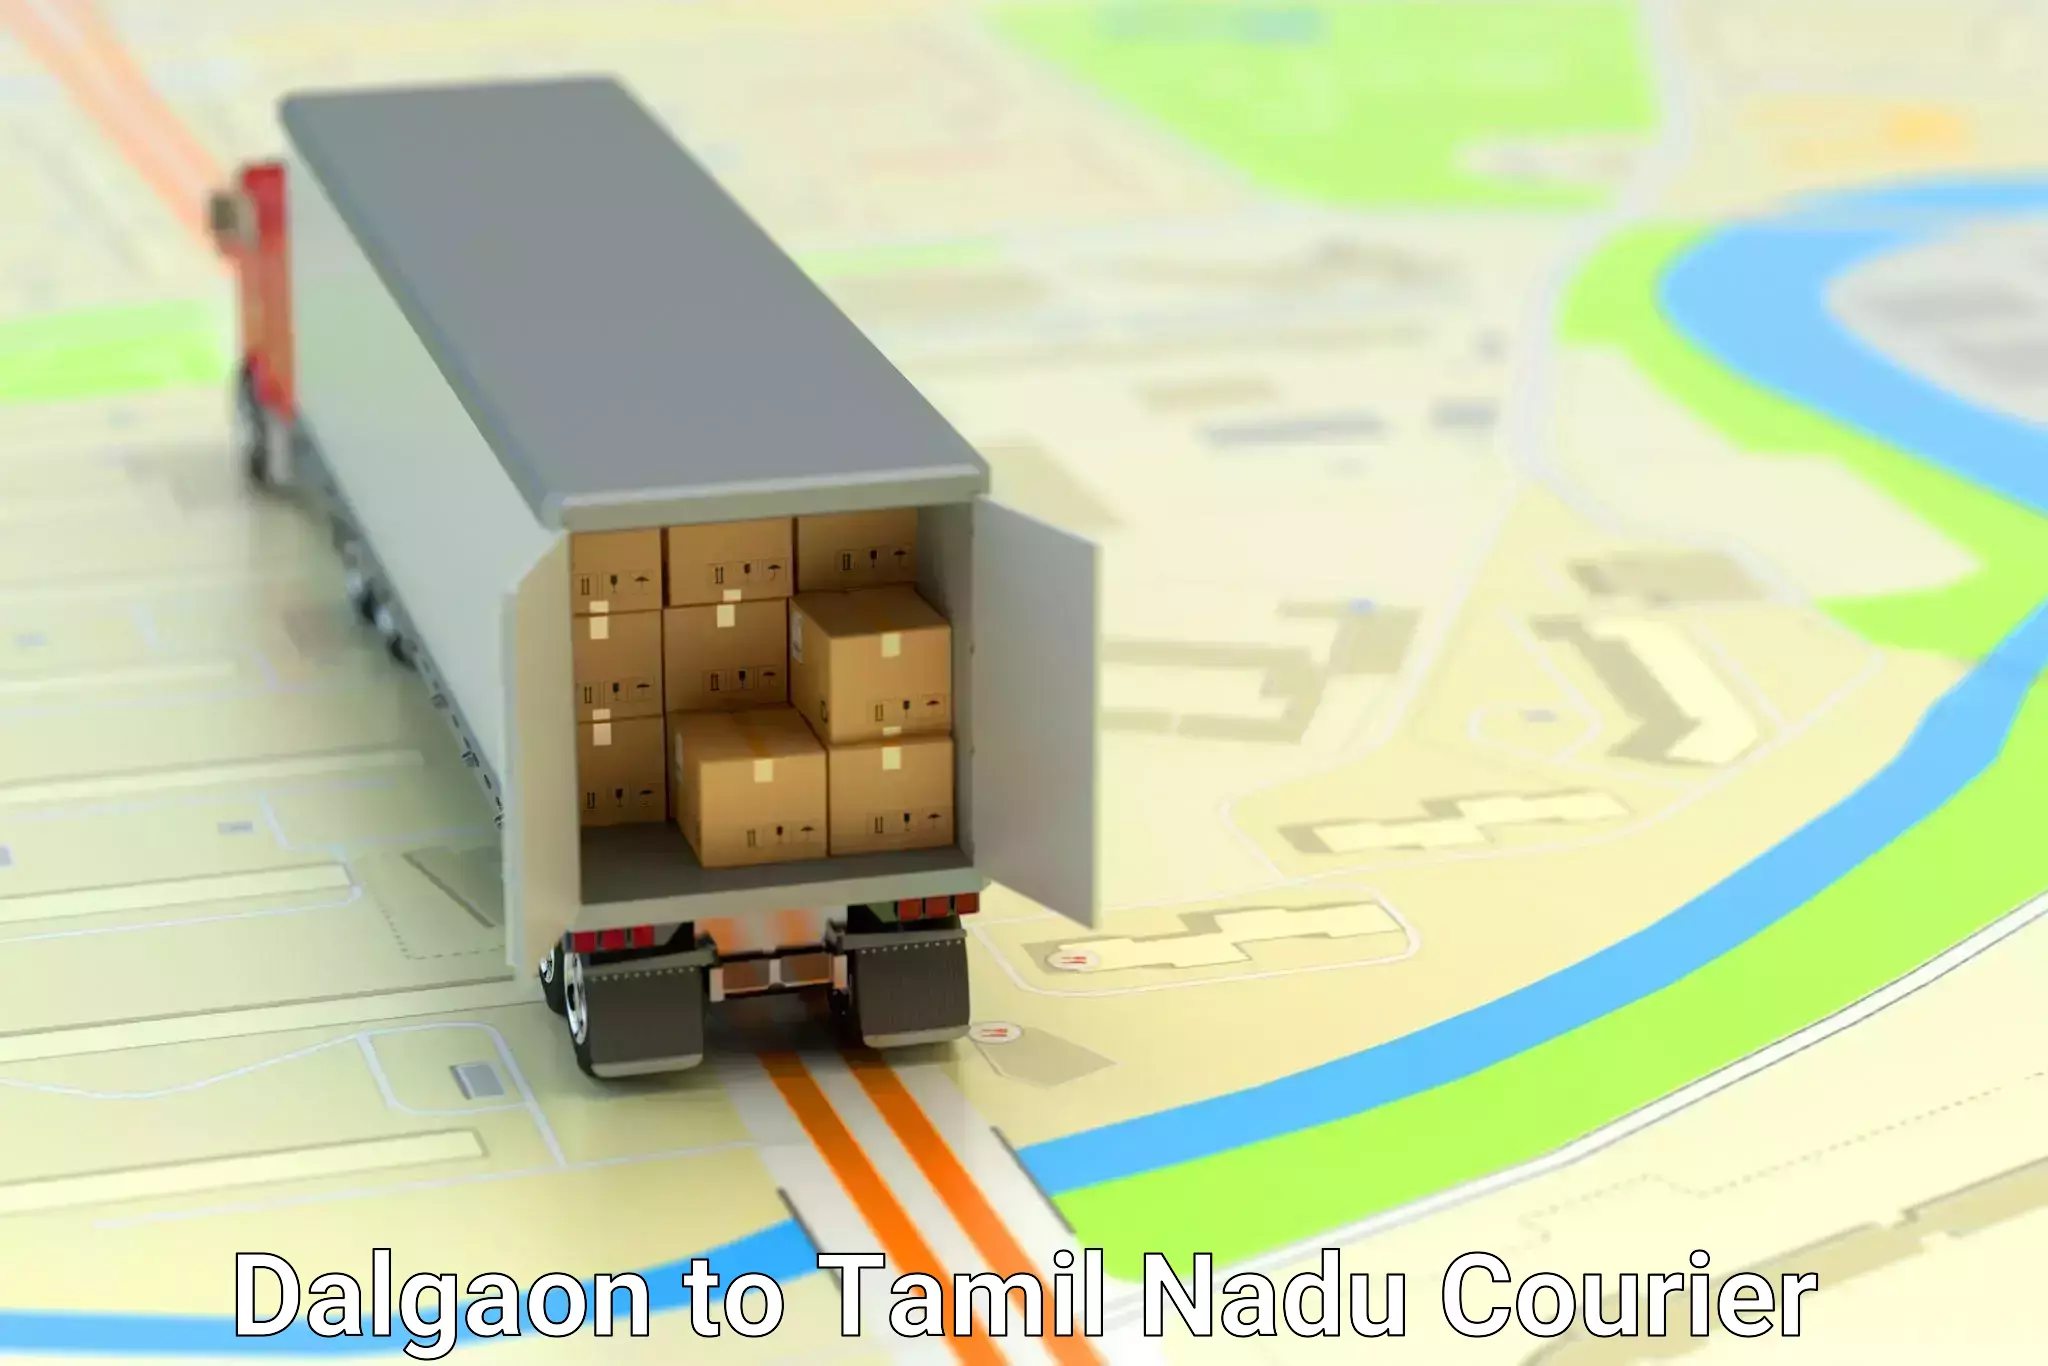 Package delivery network Dalgaon to Papanasam